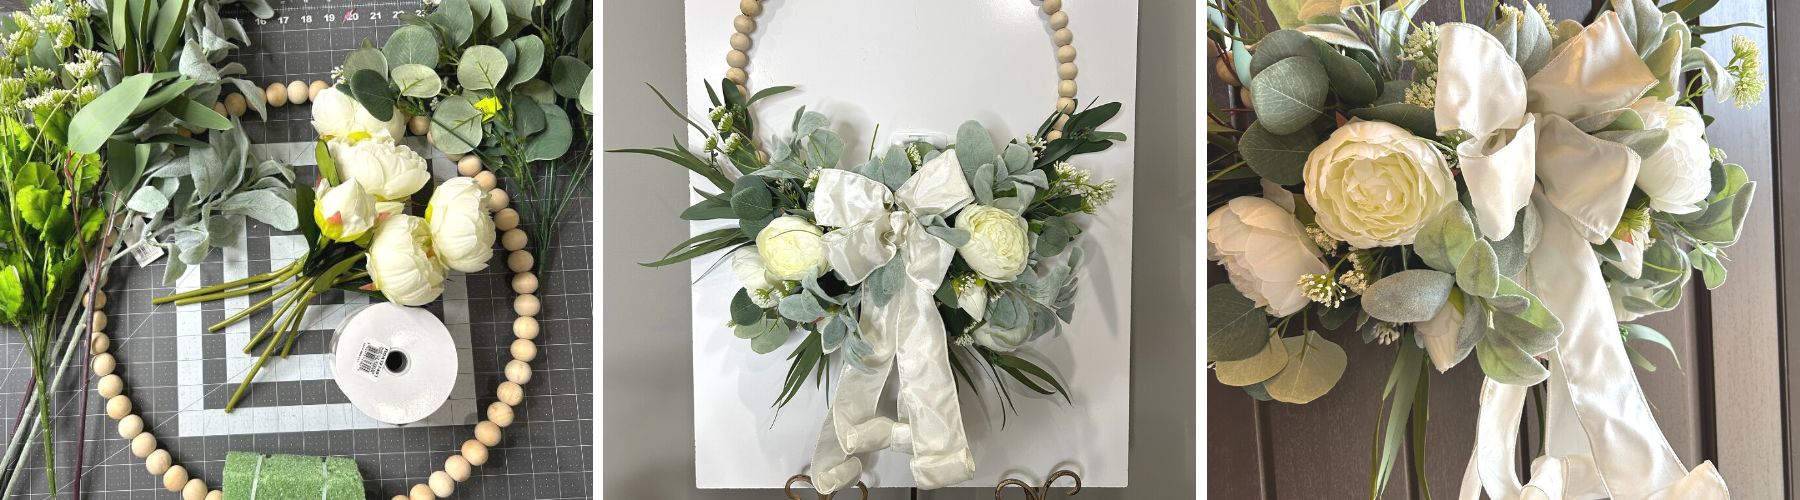 how to add florals and ribbon to a wooden bead wreath form